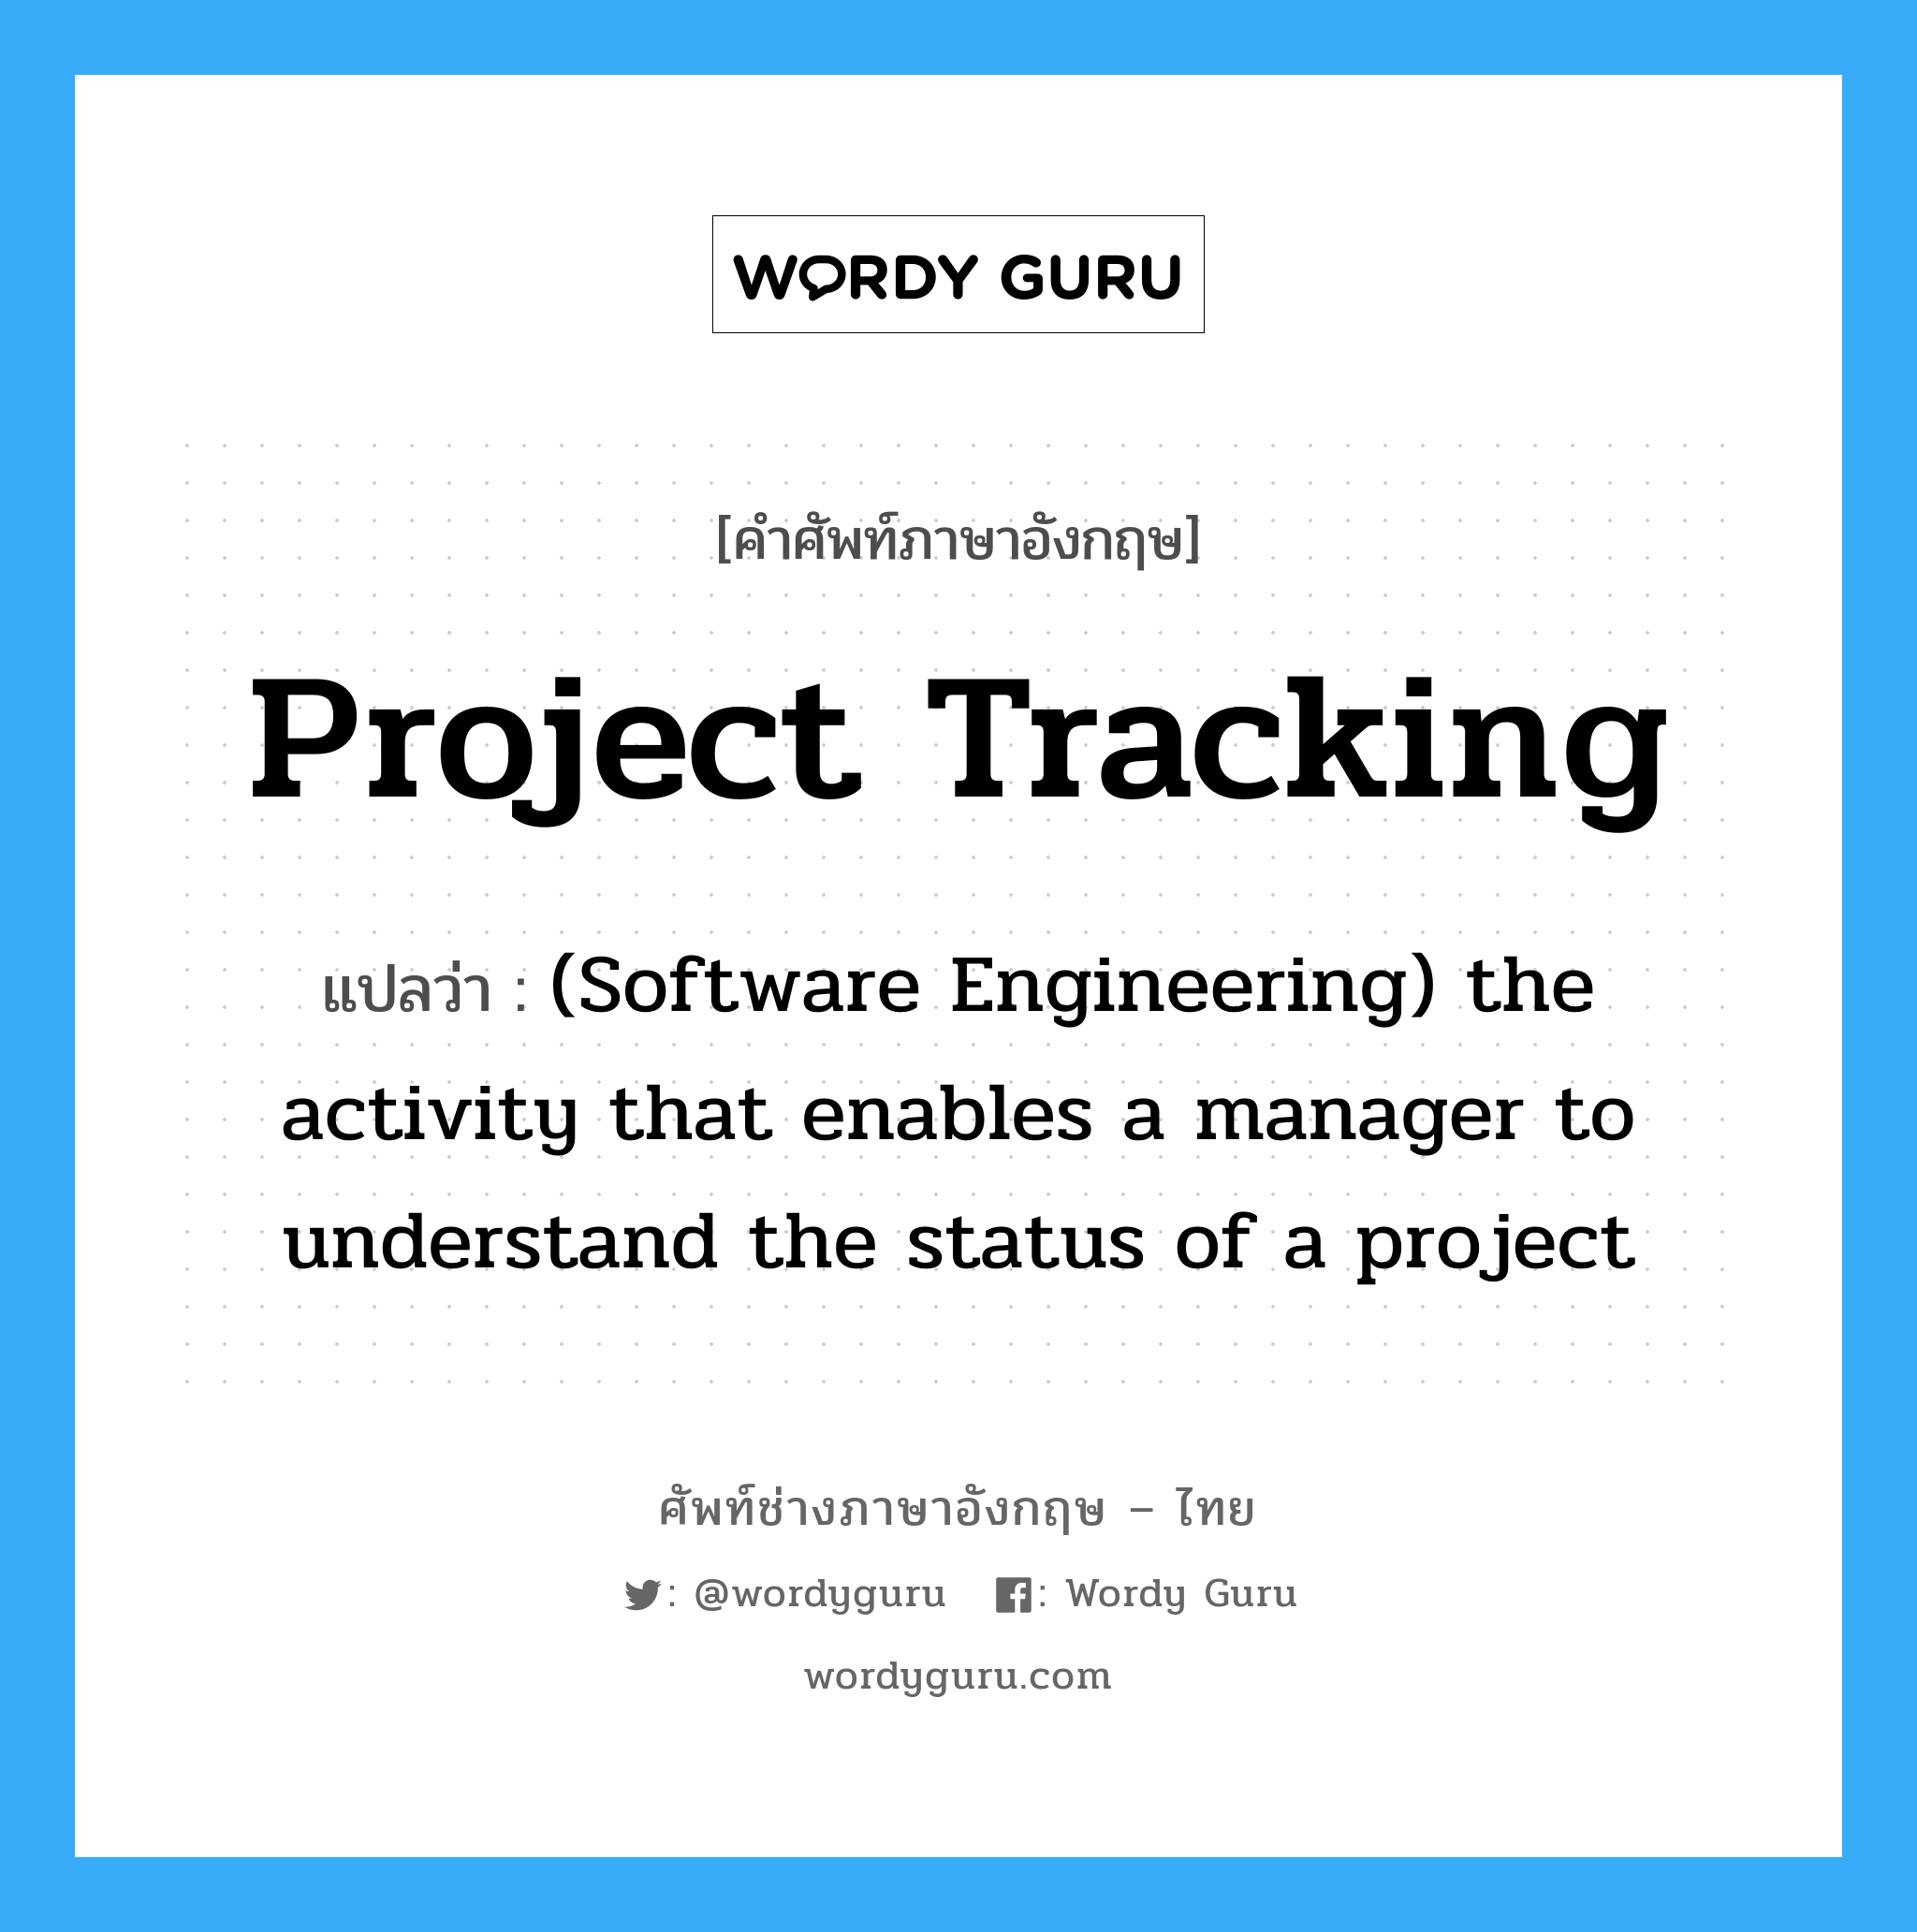 Project tracking แปลว่า?, คำศัพท์ช่างภาษาอังกฤษ - ไทย Project tracking คำศัพท์ภาษาอังกฤษ Project tracking แปลว่า (Software Engineering) the activity that enables a manager to understand the status of a project